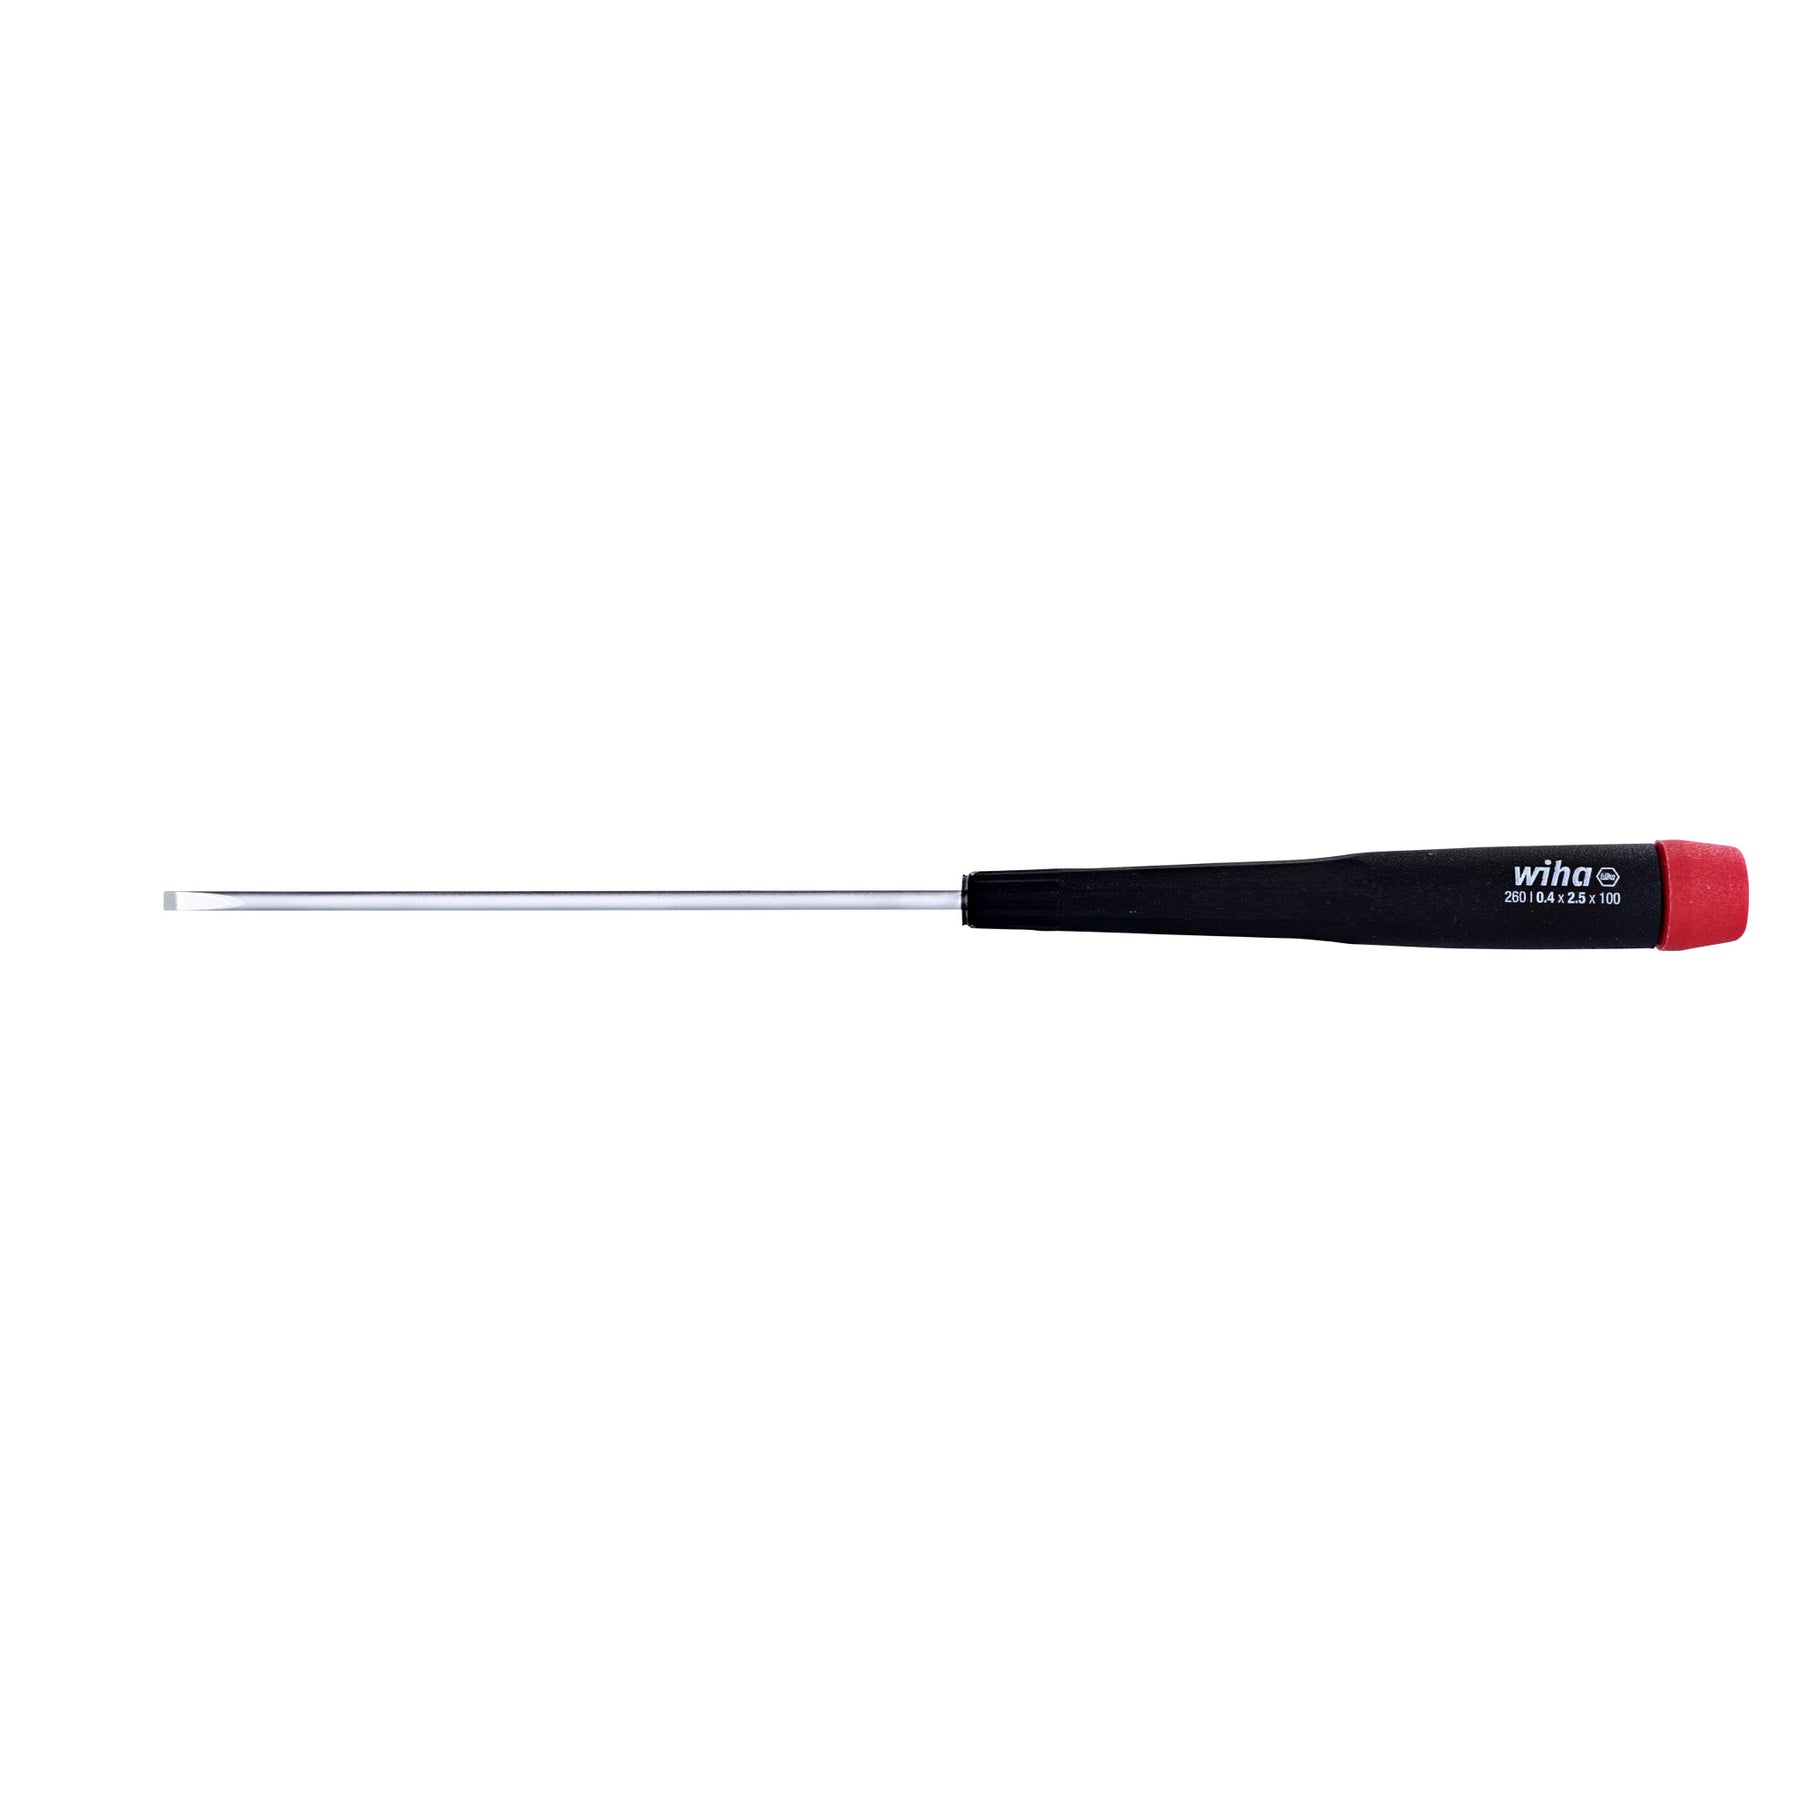 Precision Slotted Screwdriver 2.5mm x 100mm